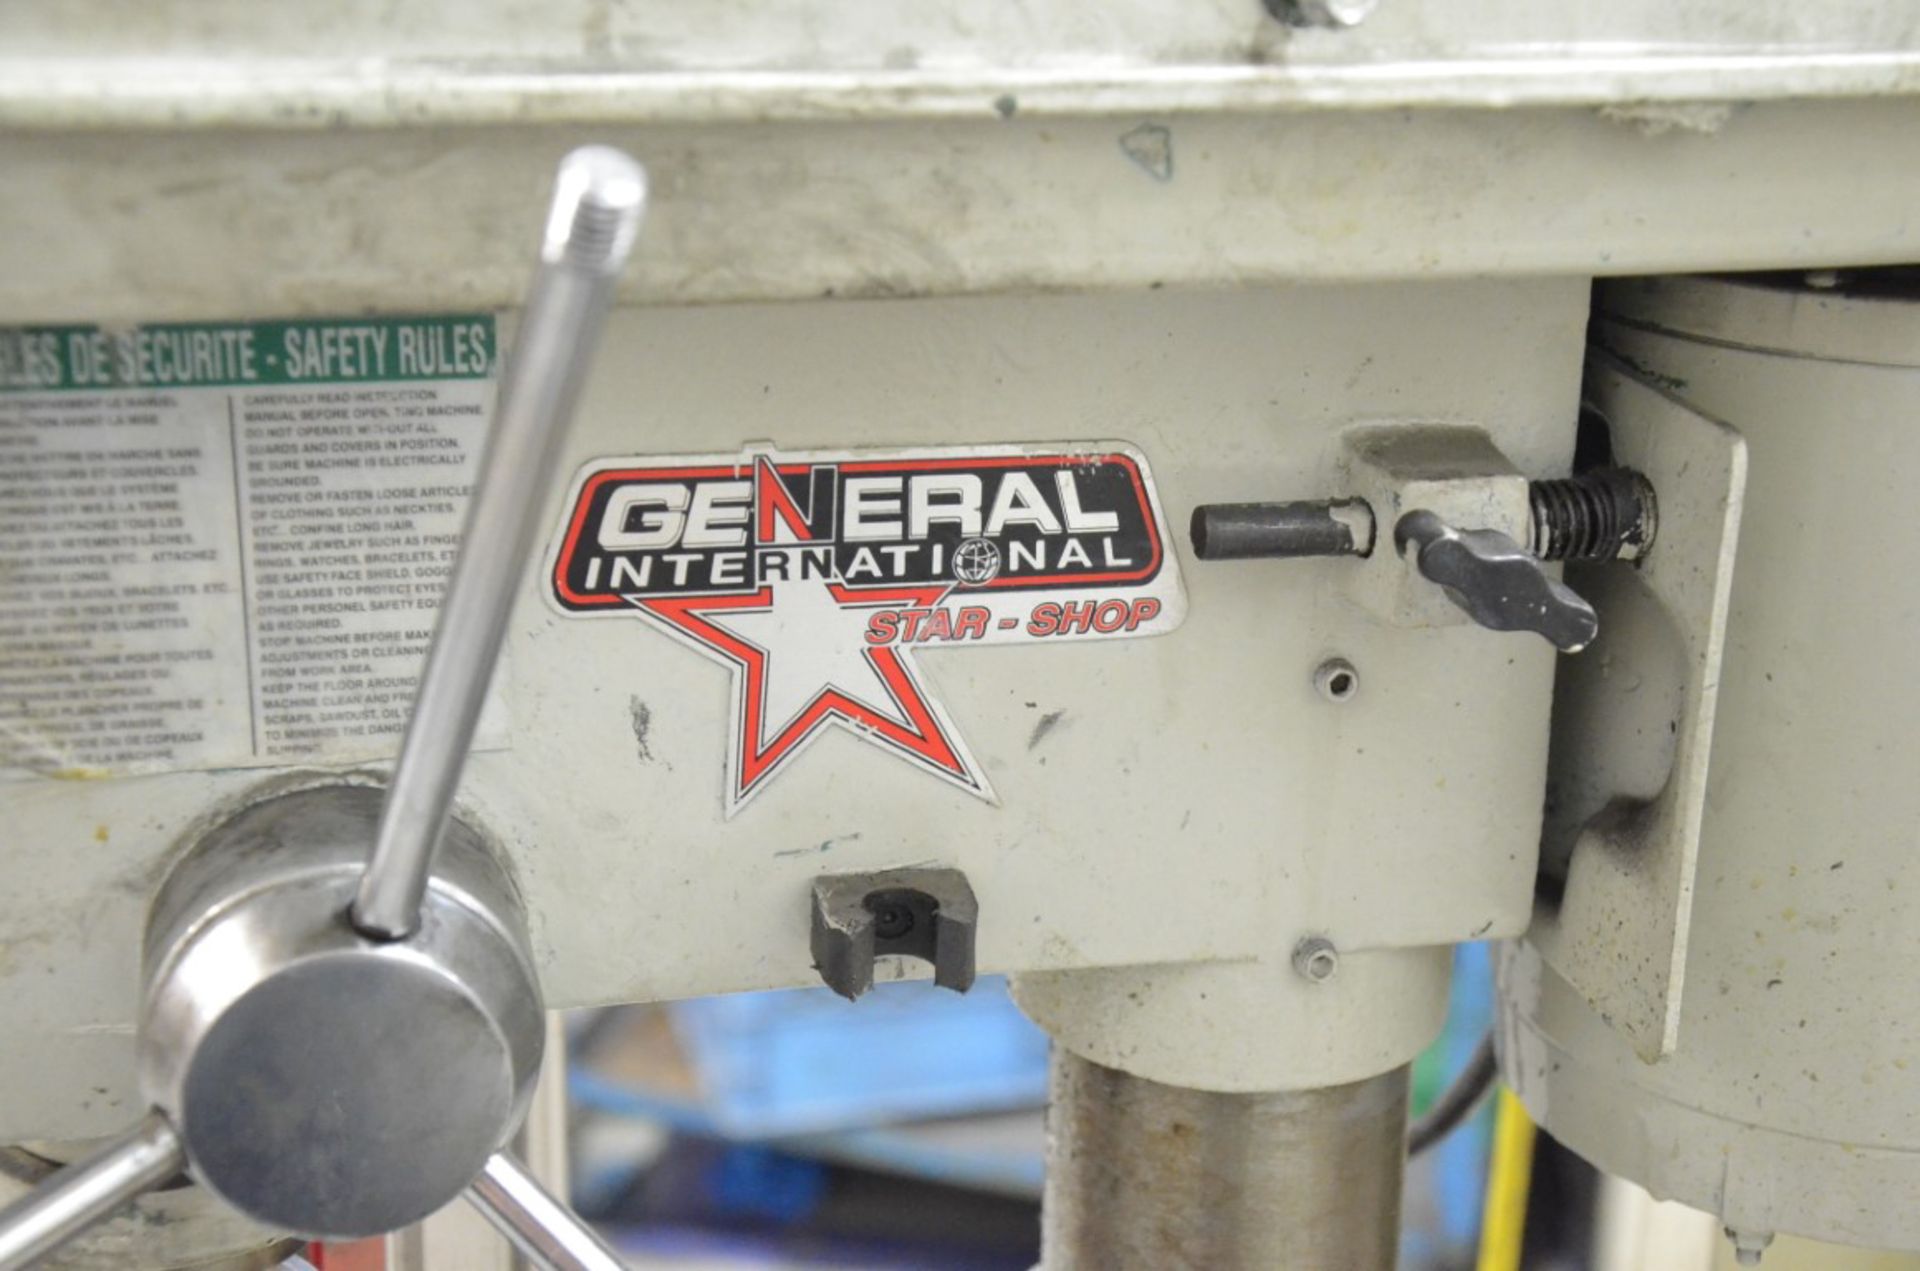 GENERAL STAR SHOP FLOOR TYPE DRILL PRESS, S/N N/A - Image 2 of 3